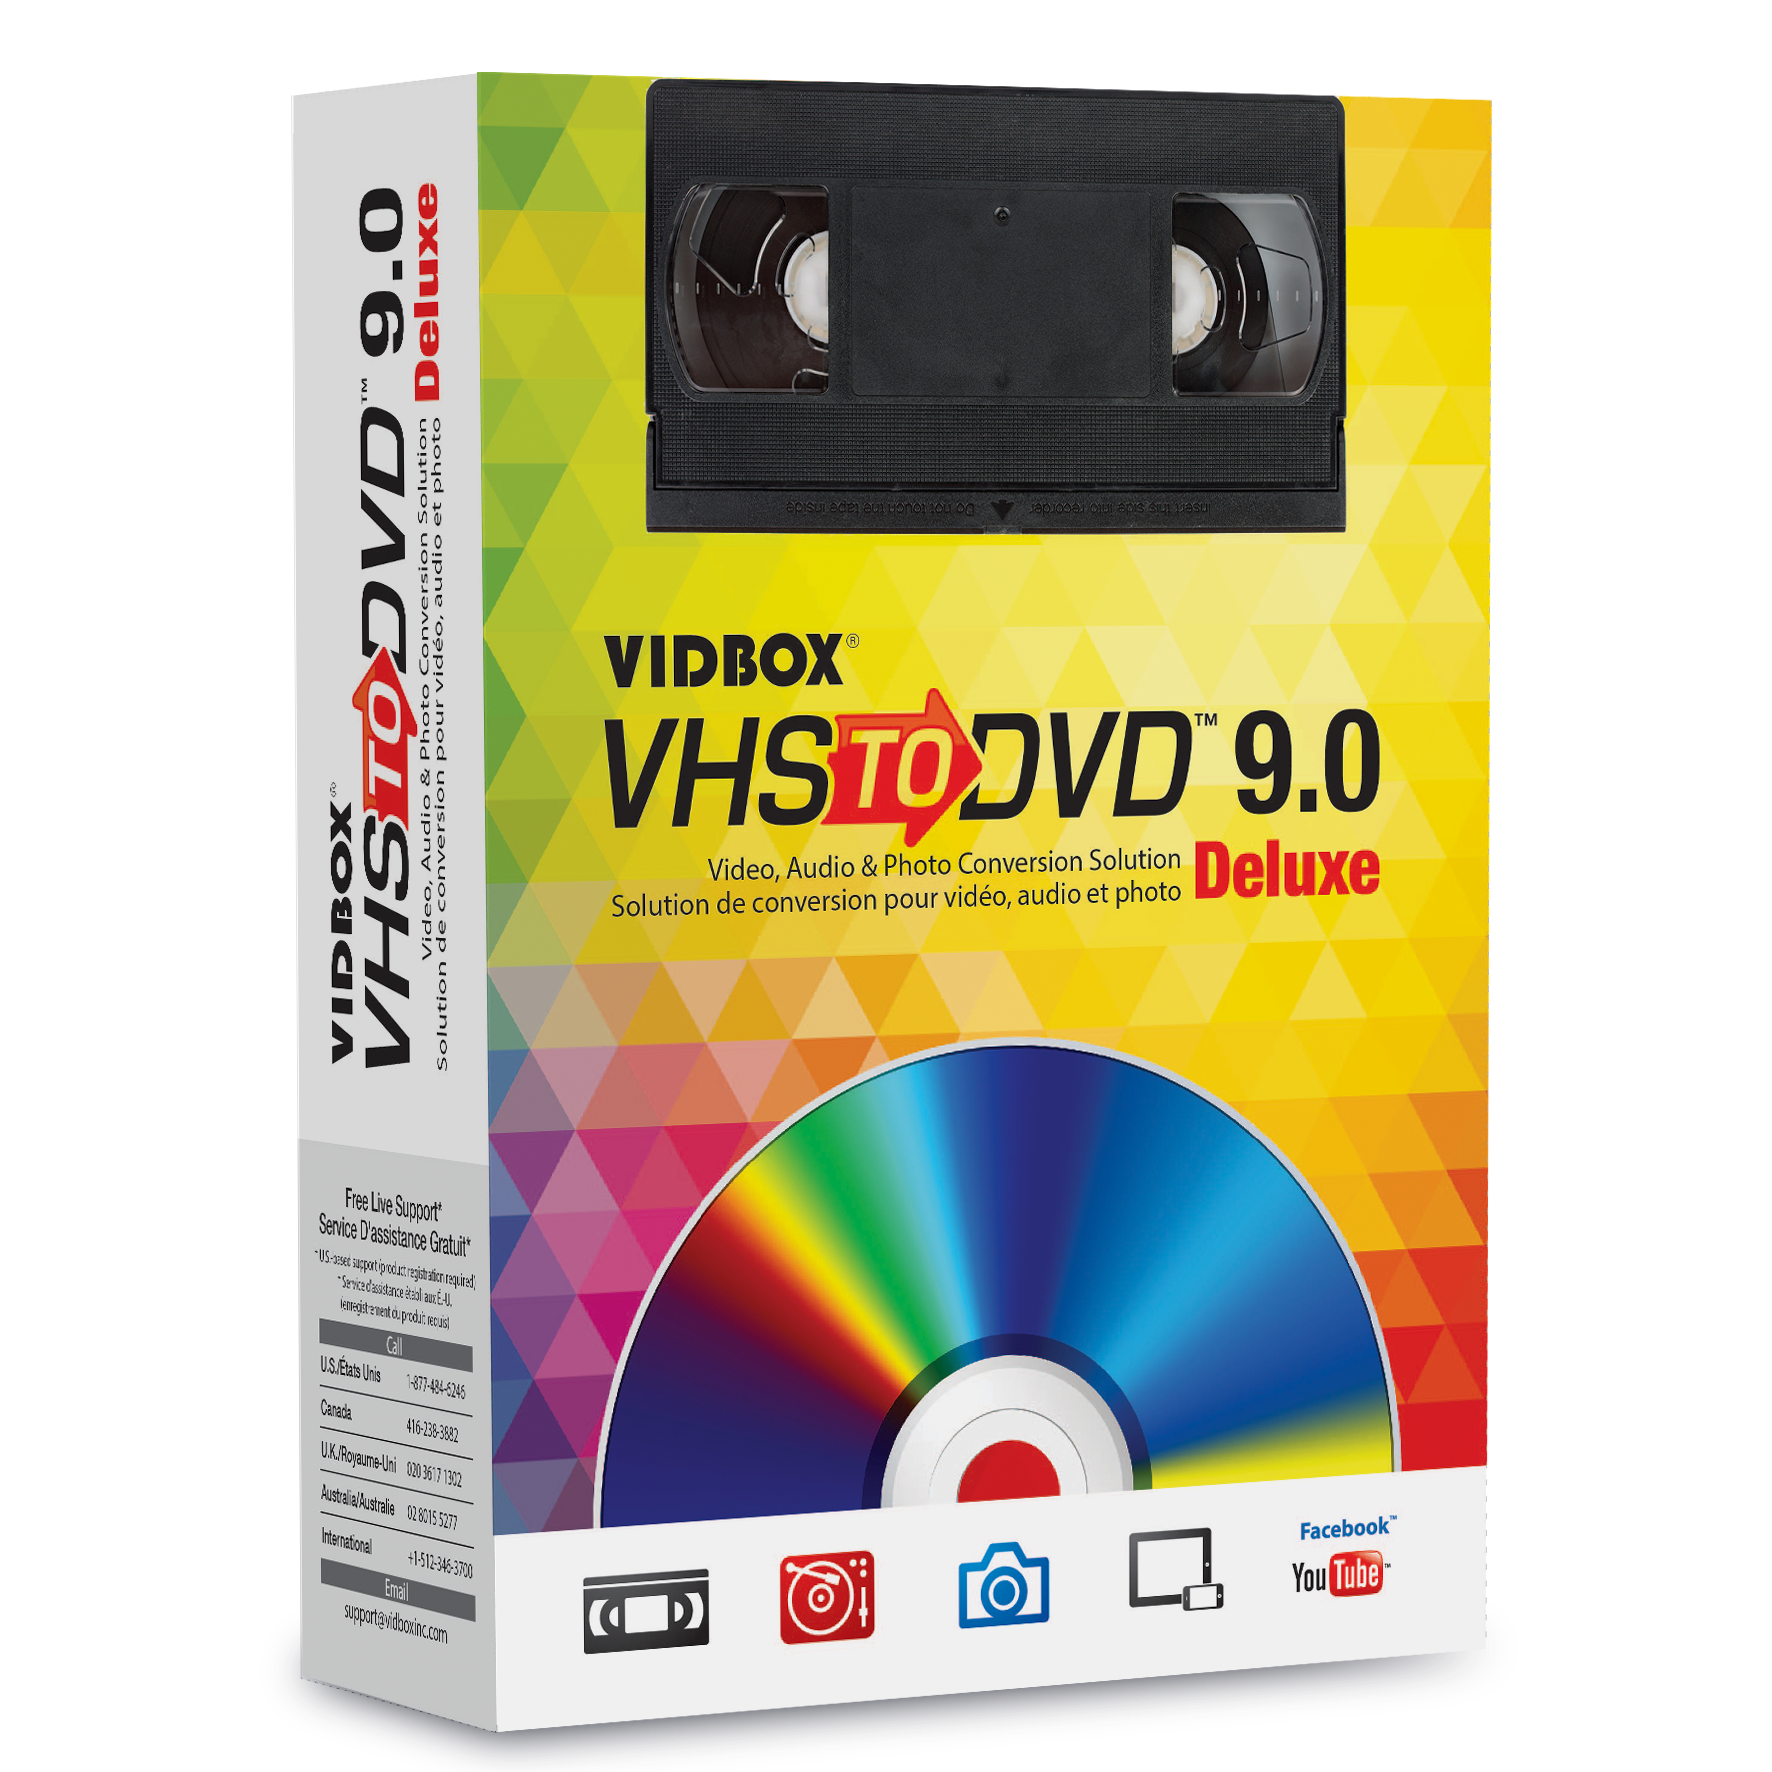 Copy VHS to PC kit. Digitise Video & Camcorder Tapes to Windows 11/10 PC  MP4 DVD